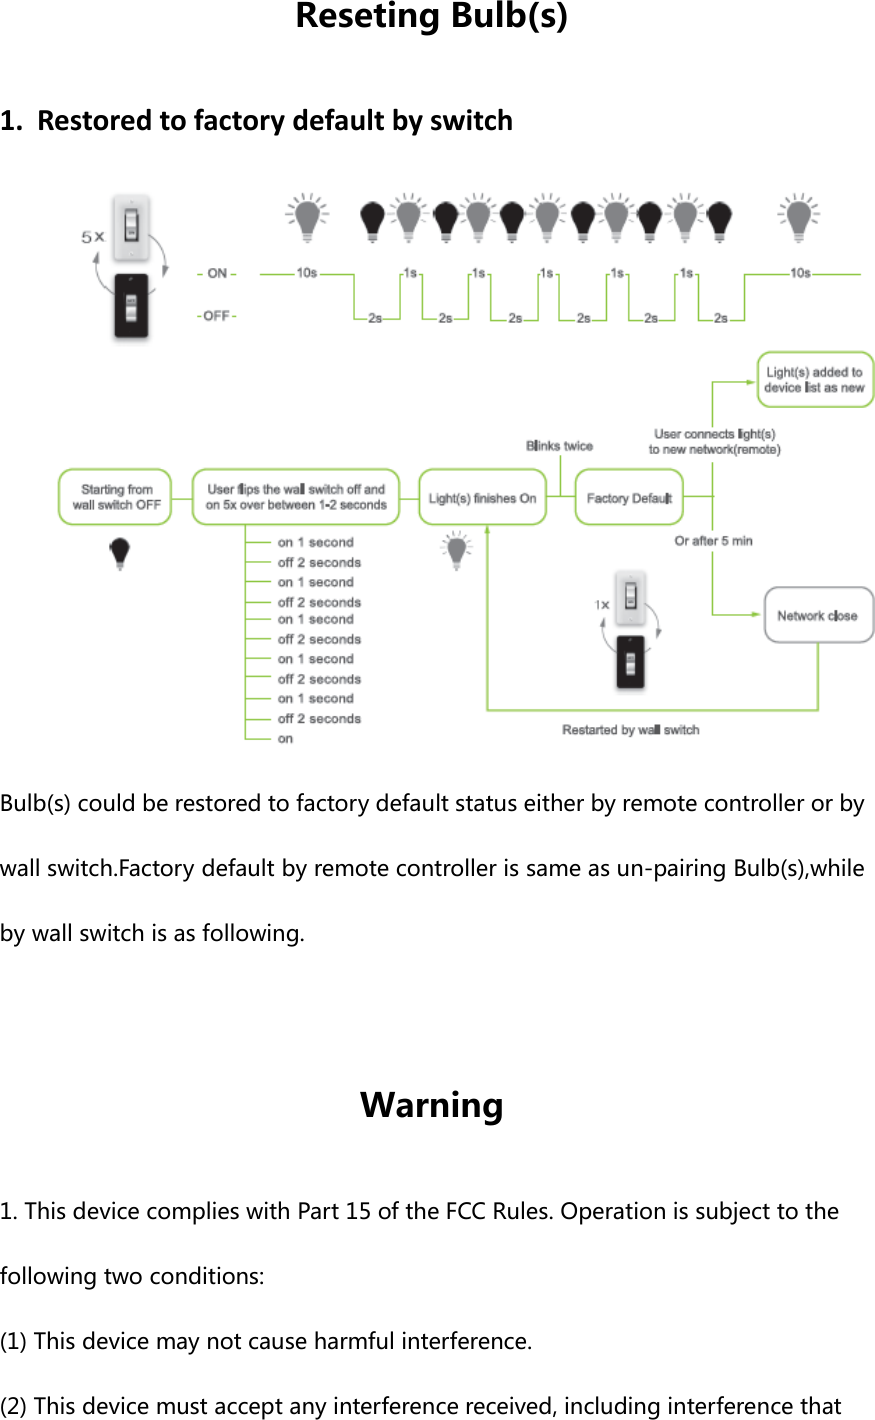 Reseting Bulb(s) 1. Restored to factory default by switch  Bulb(s) could be restored to factory default status either by remote controller or by wall switch.Factory default by remote controller is same as un-pairing Bulb(s),while by wall switch is as following.  Warning 1. This device complies with Part 15 of the FCC Rules. Operation is subject to the following two conditions: (1) This device may not cause harmful interference. (2) This device must accept any interference received, including interference that 